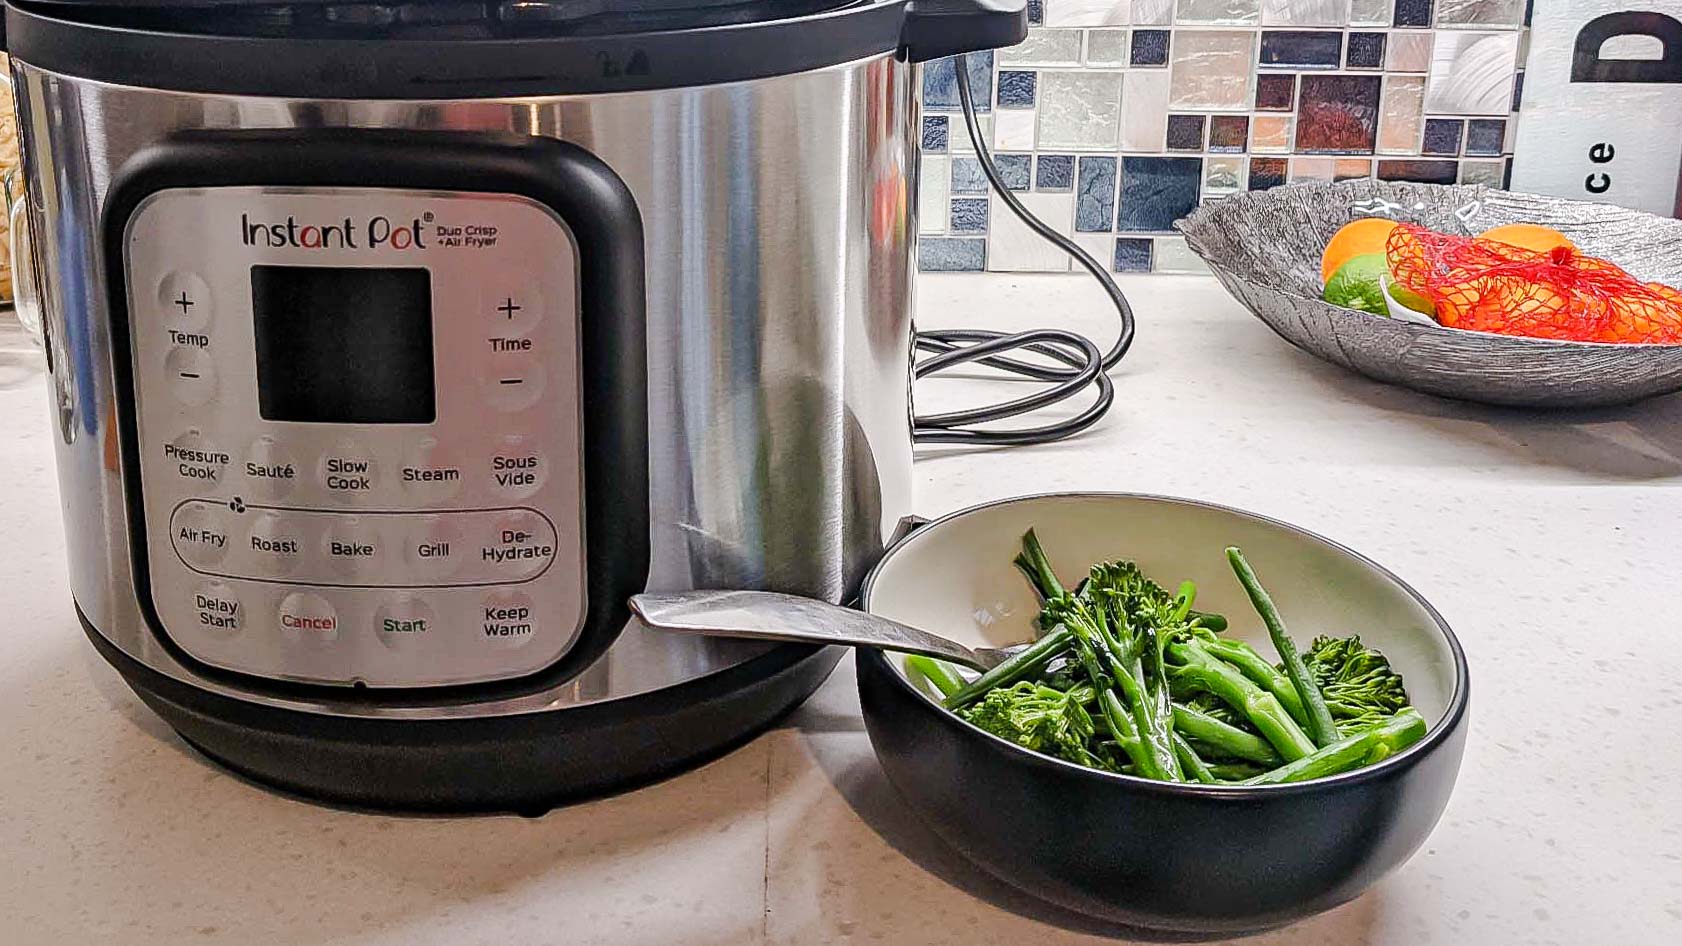 Instant Pot Duo Crisp and Air Fryer with cooked vegetables